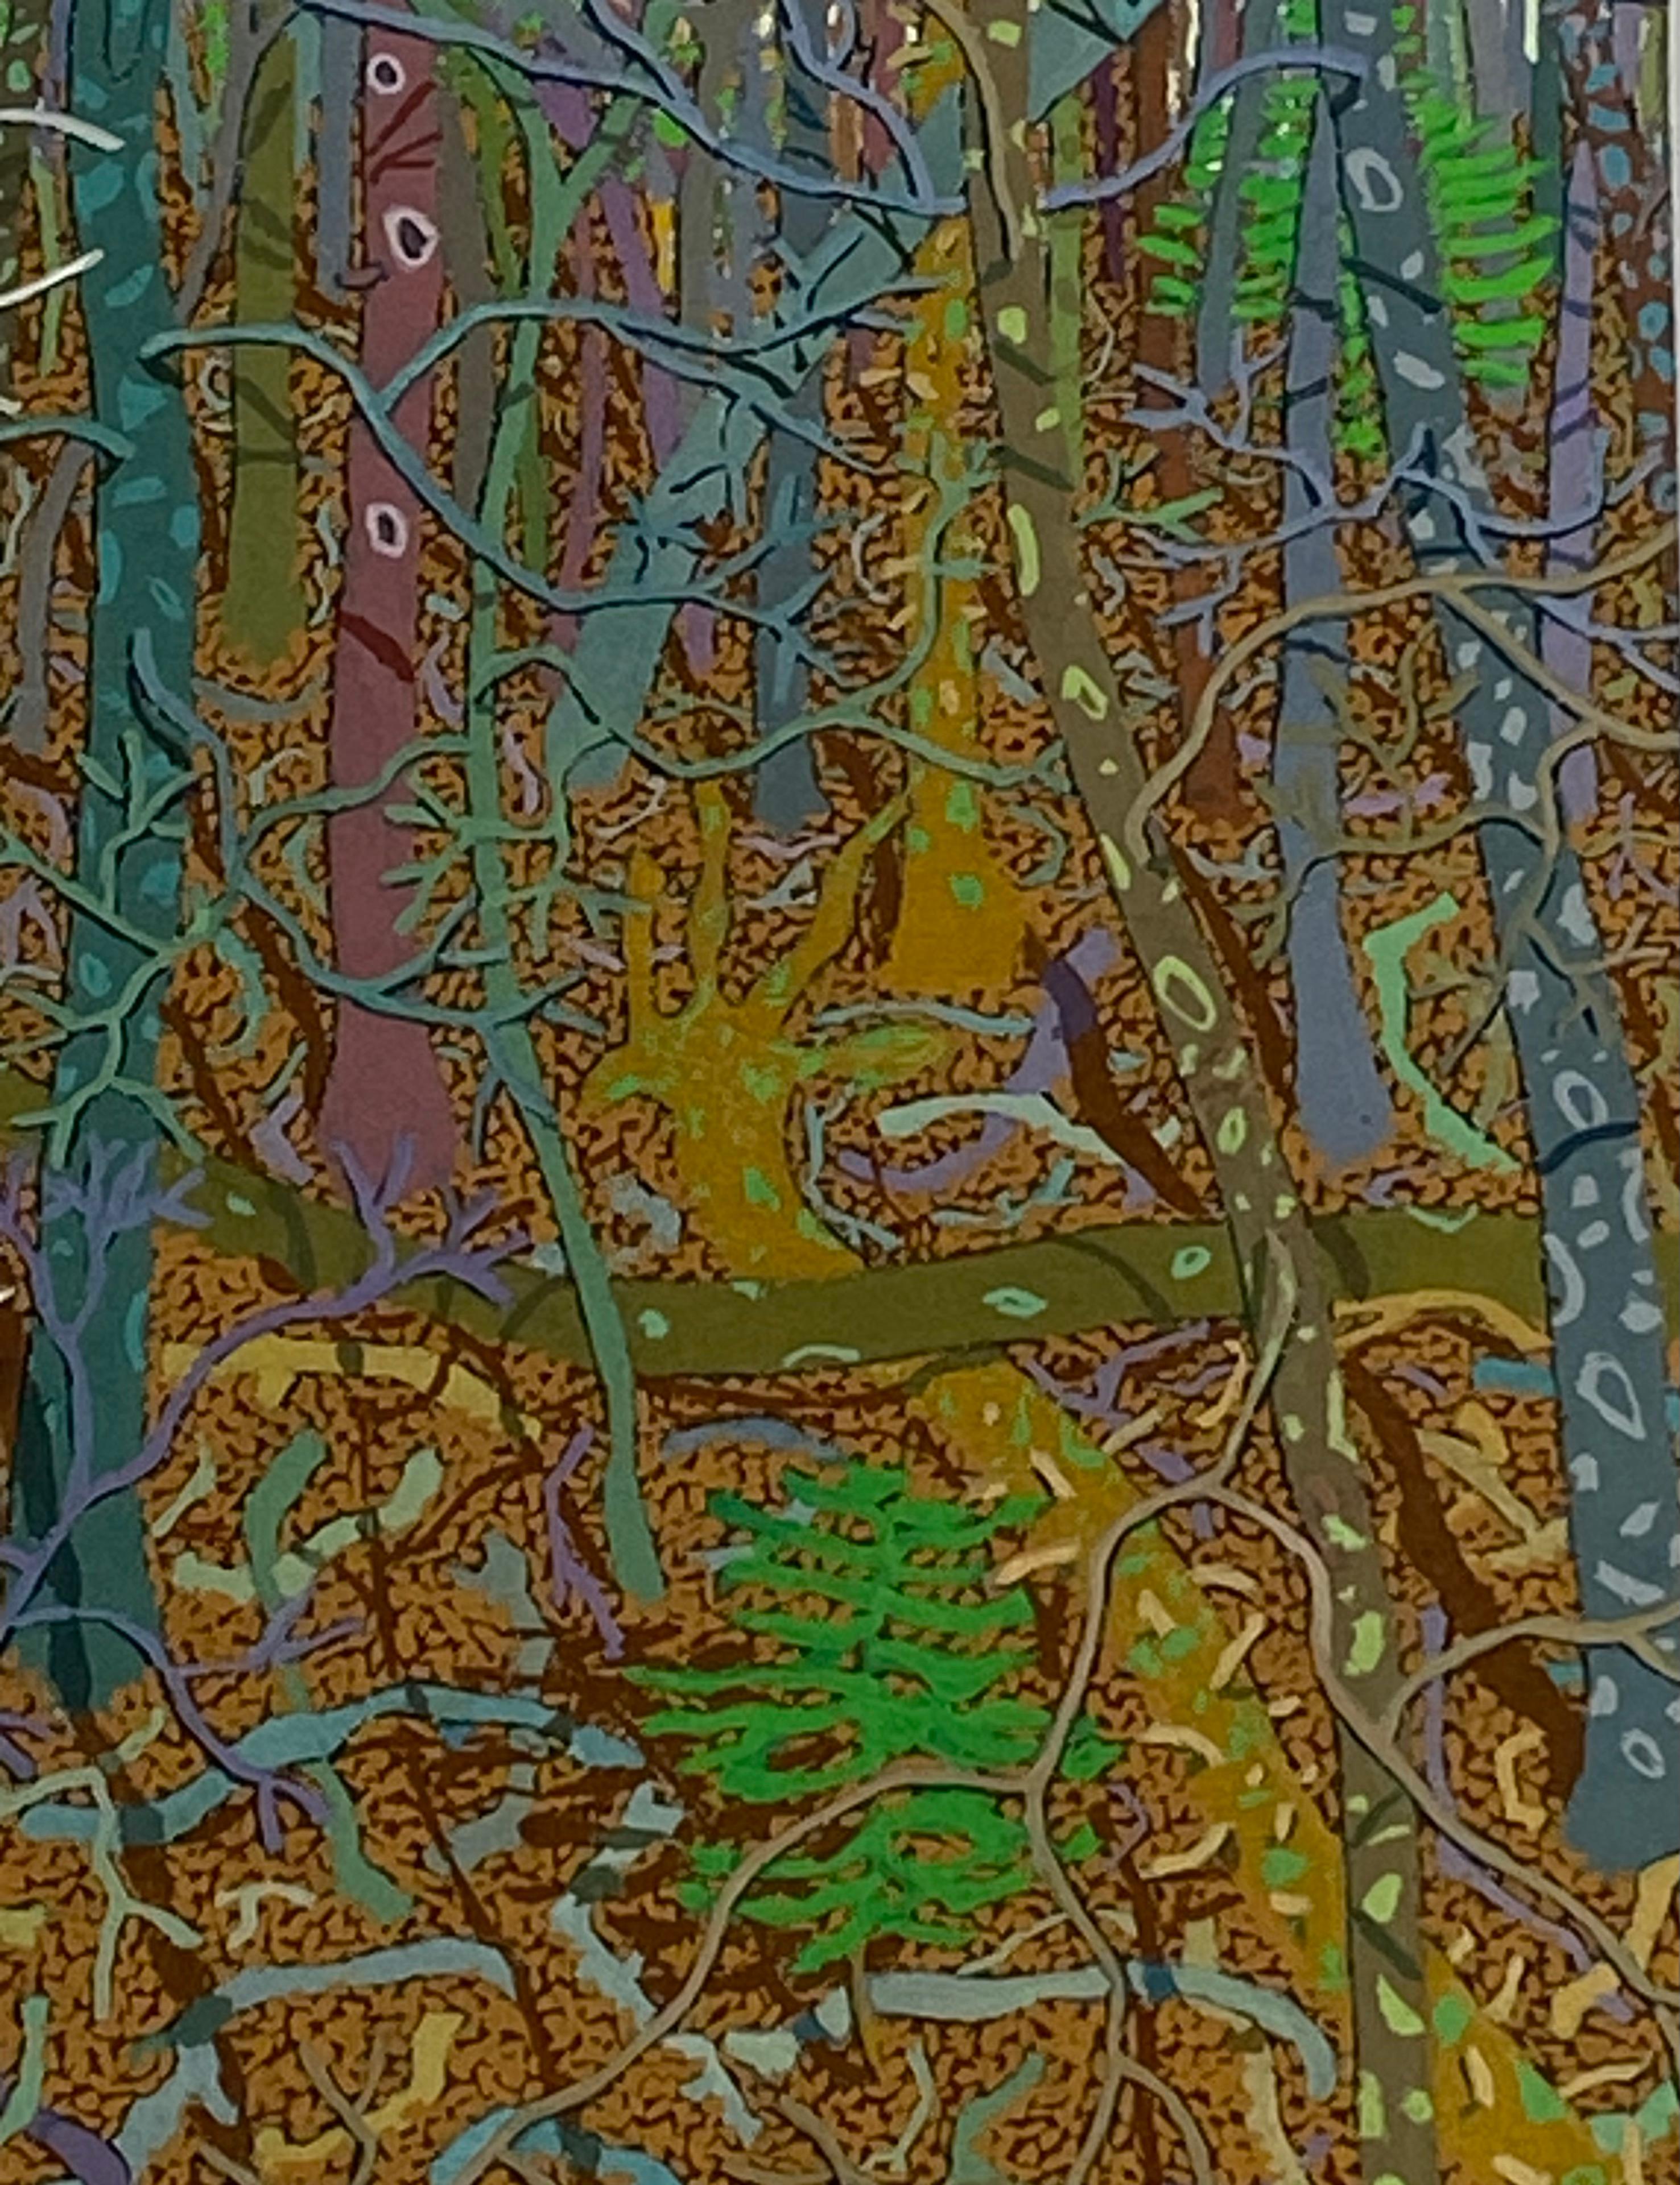 Rich, warm earth-toned brown trees line the forest floor in March in this rich, highly detailed landscape. The many shades of brown are offset by shades of luminous verdant green and light beige, alluding to the peace of the forest and the